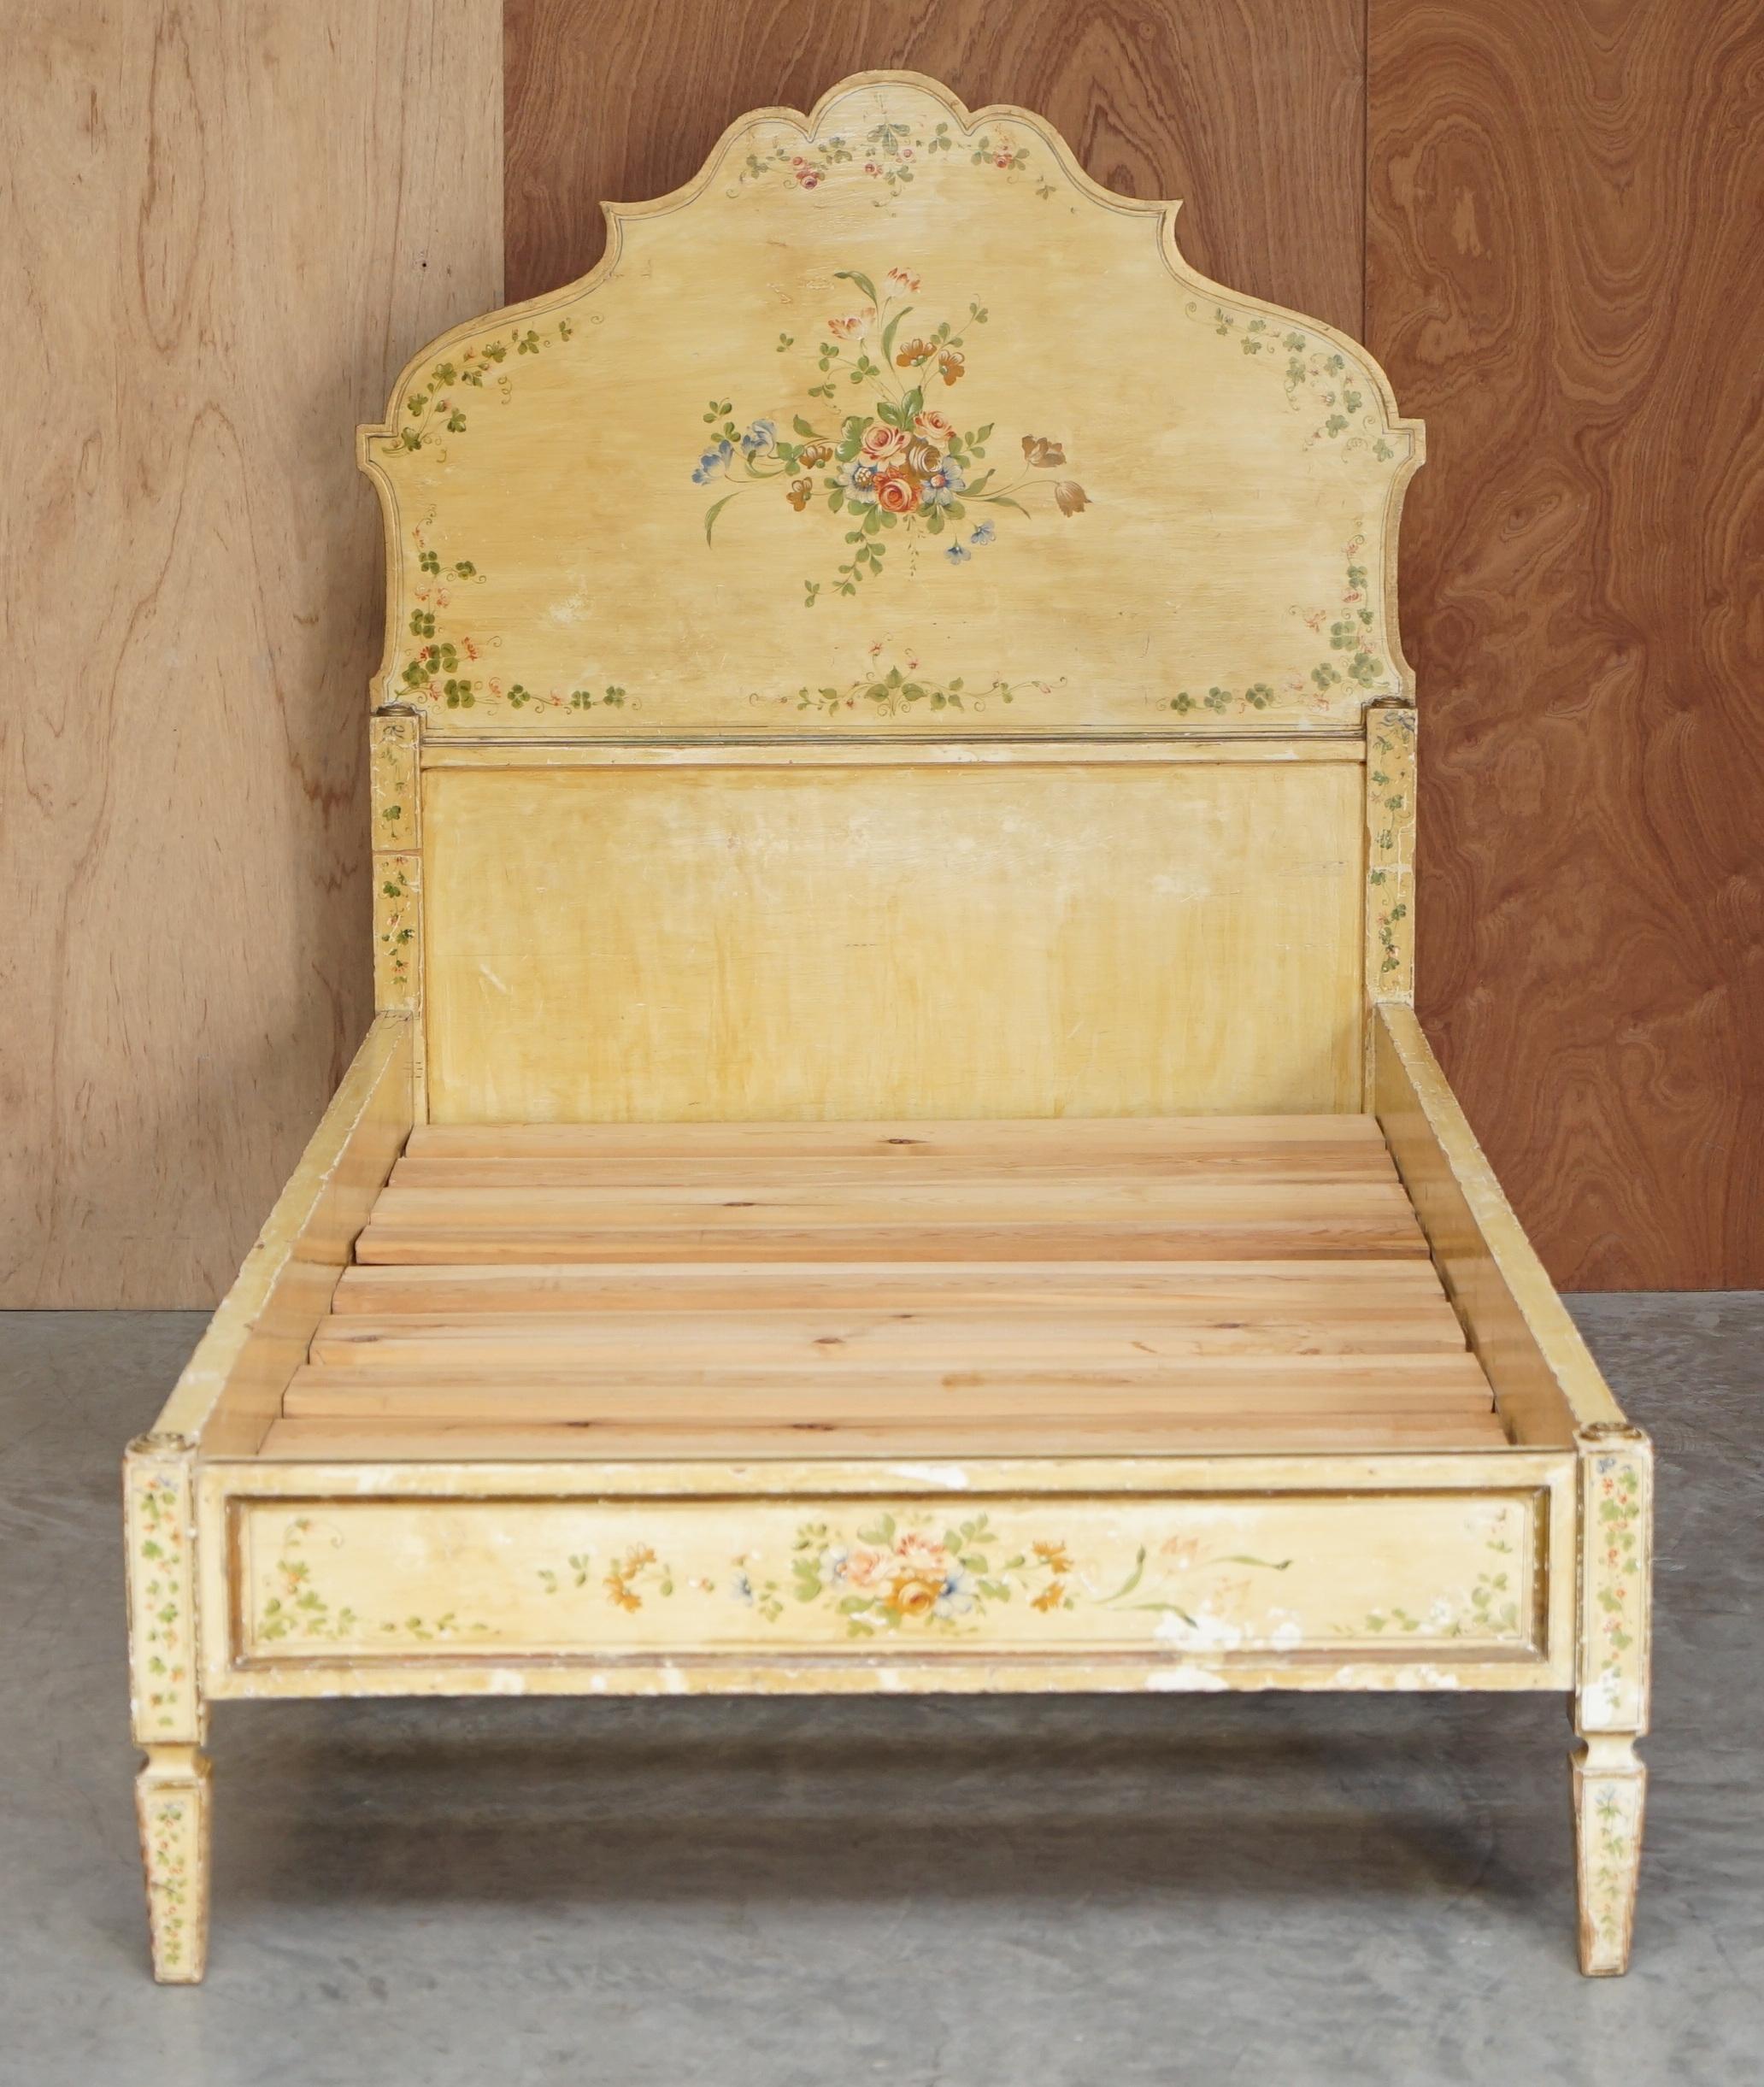 We are delighted to offer for sale this sublime quality, antique French hand painted Napoleon II style bed frame

This bed is of the finest quality, it has some good age to it, it is an original hand painted French piece not later reproduction